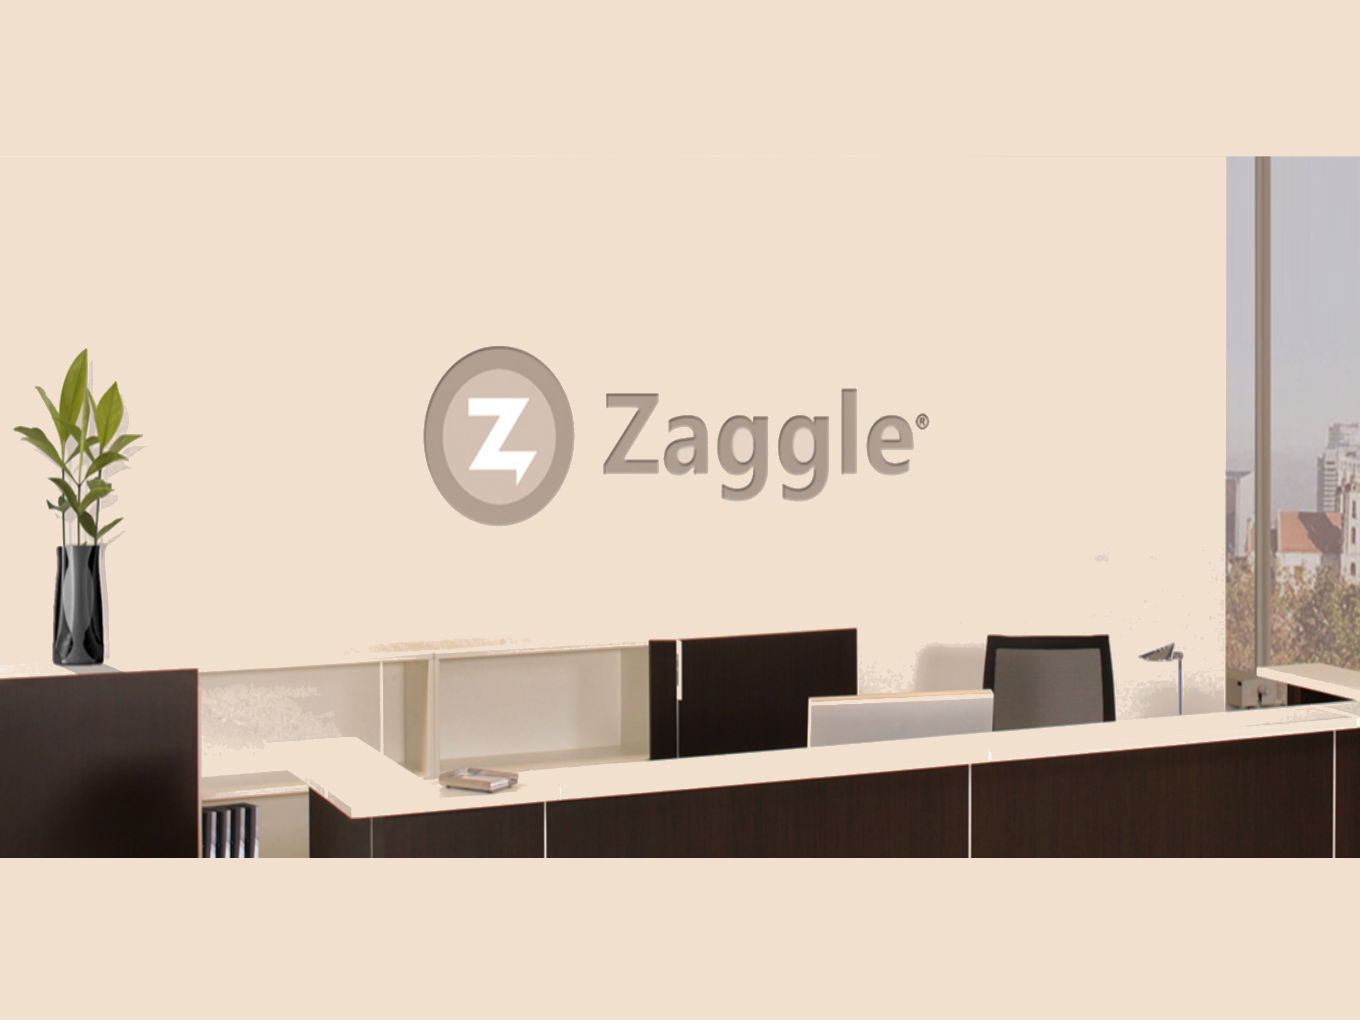 Expense Management Startup Zaggle Acquires Mobile Payments Startup Click&Pay